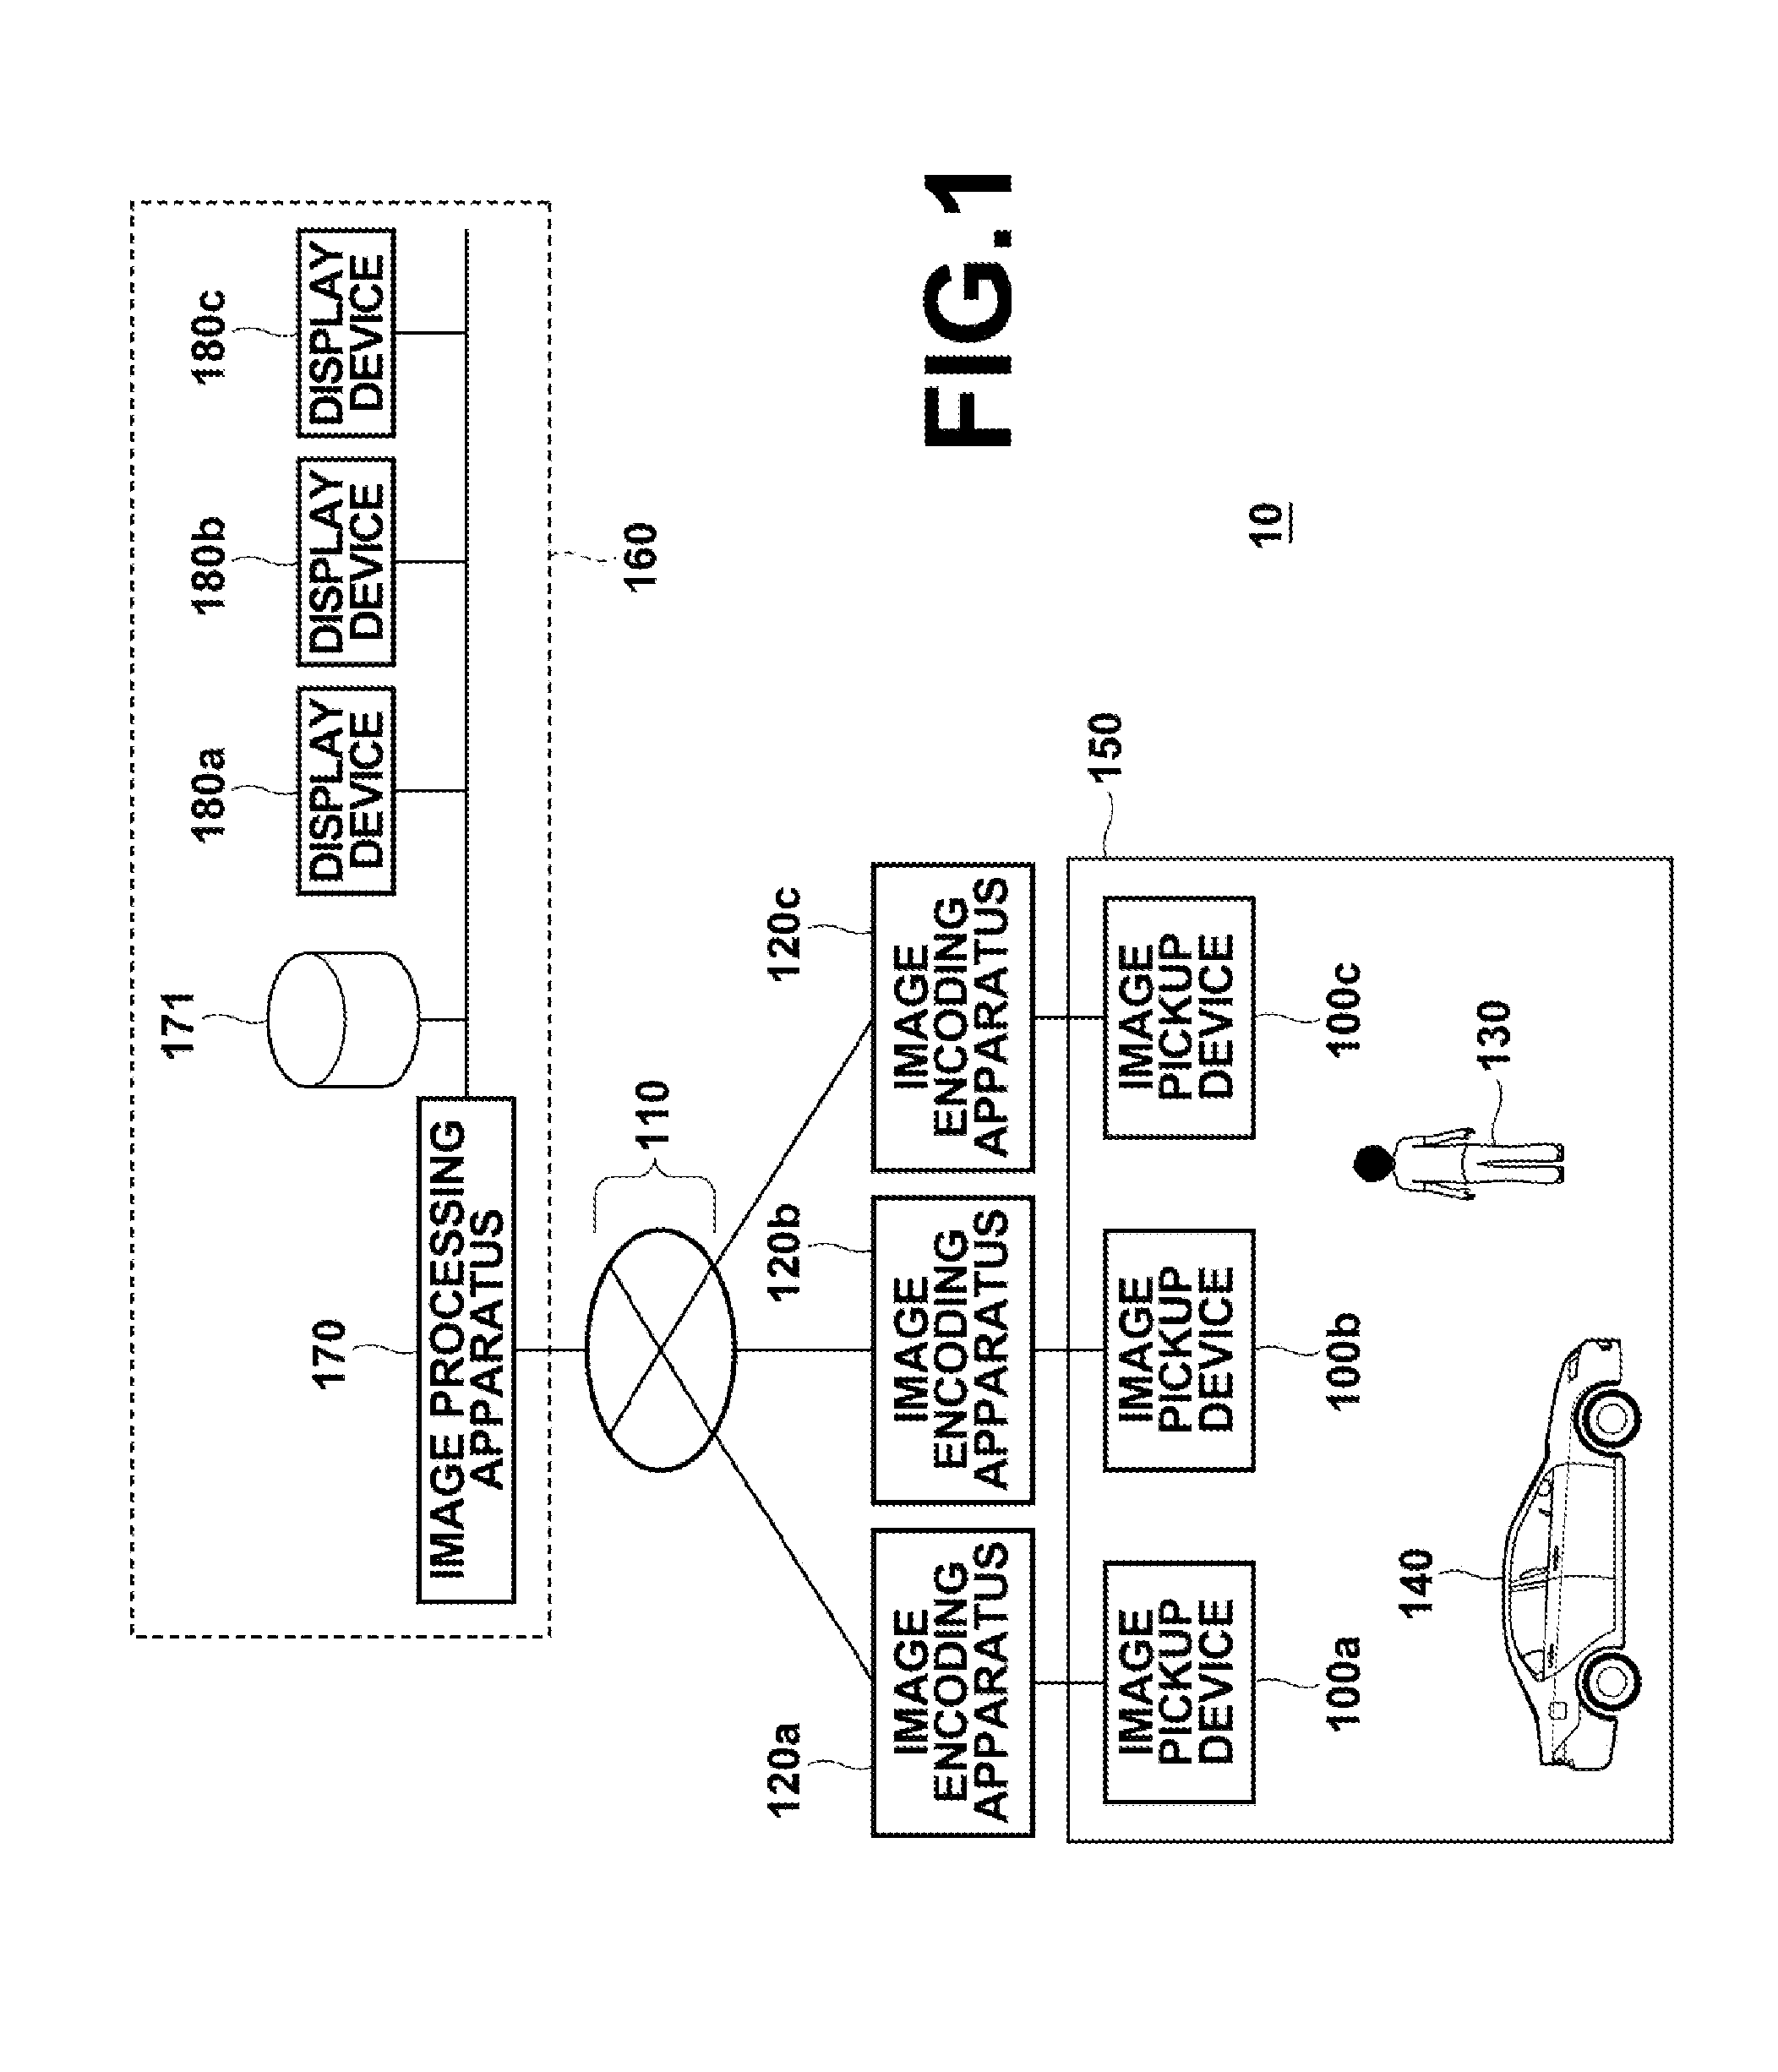 Apparatus, process, and program for image encoding